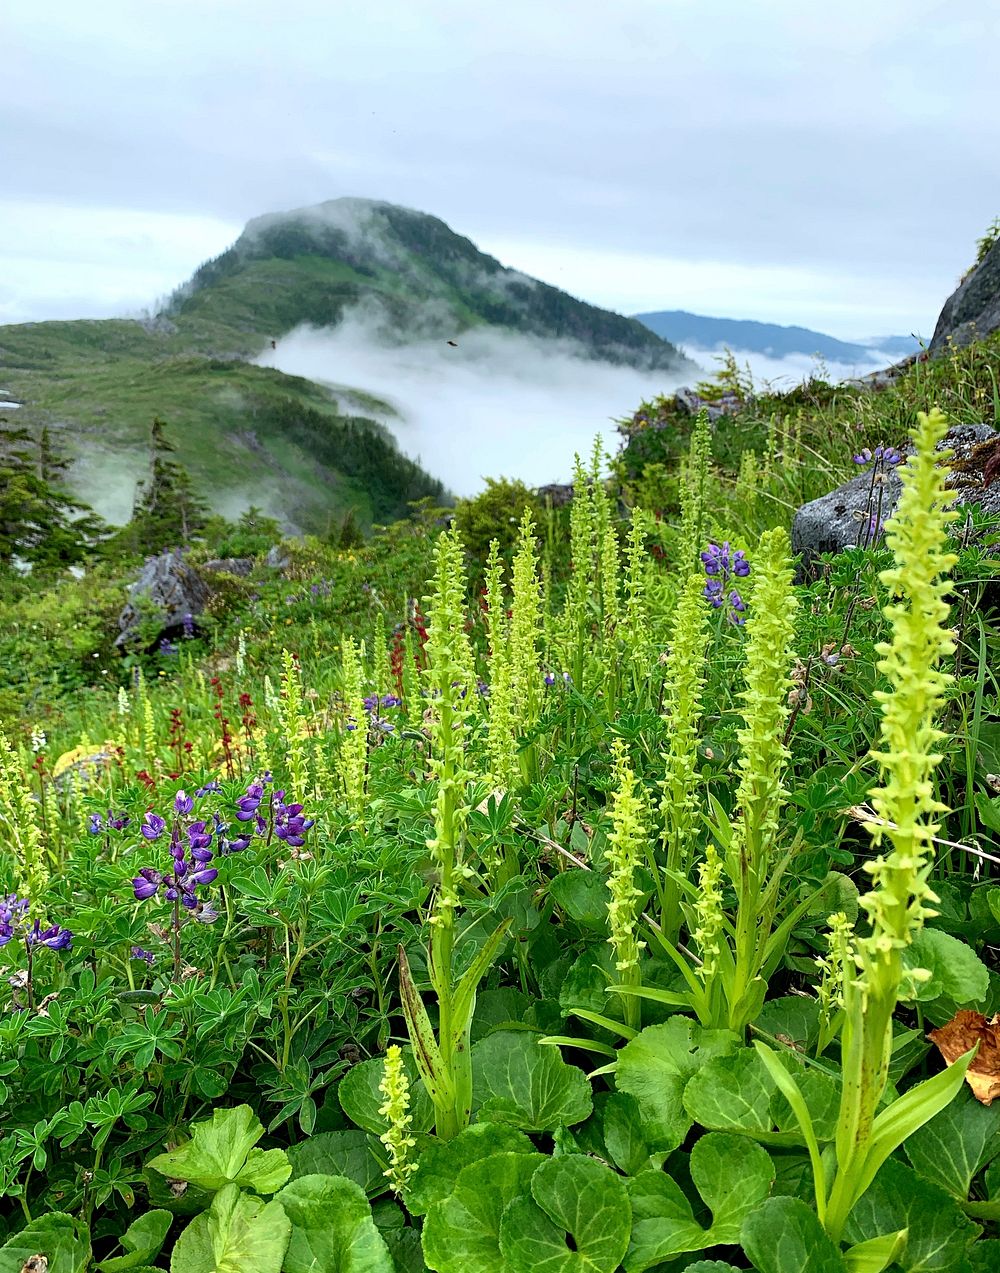 Lupine, leatherleaf saxifrage, and orchids on a foggy morning on Dude Mountain looking over to Brown Mountain, Ketchikan…